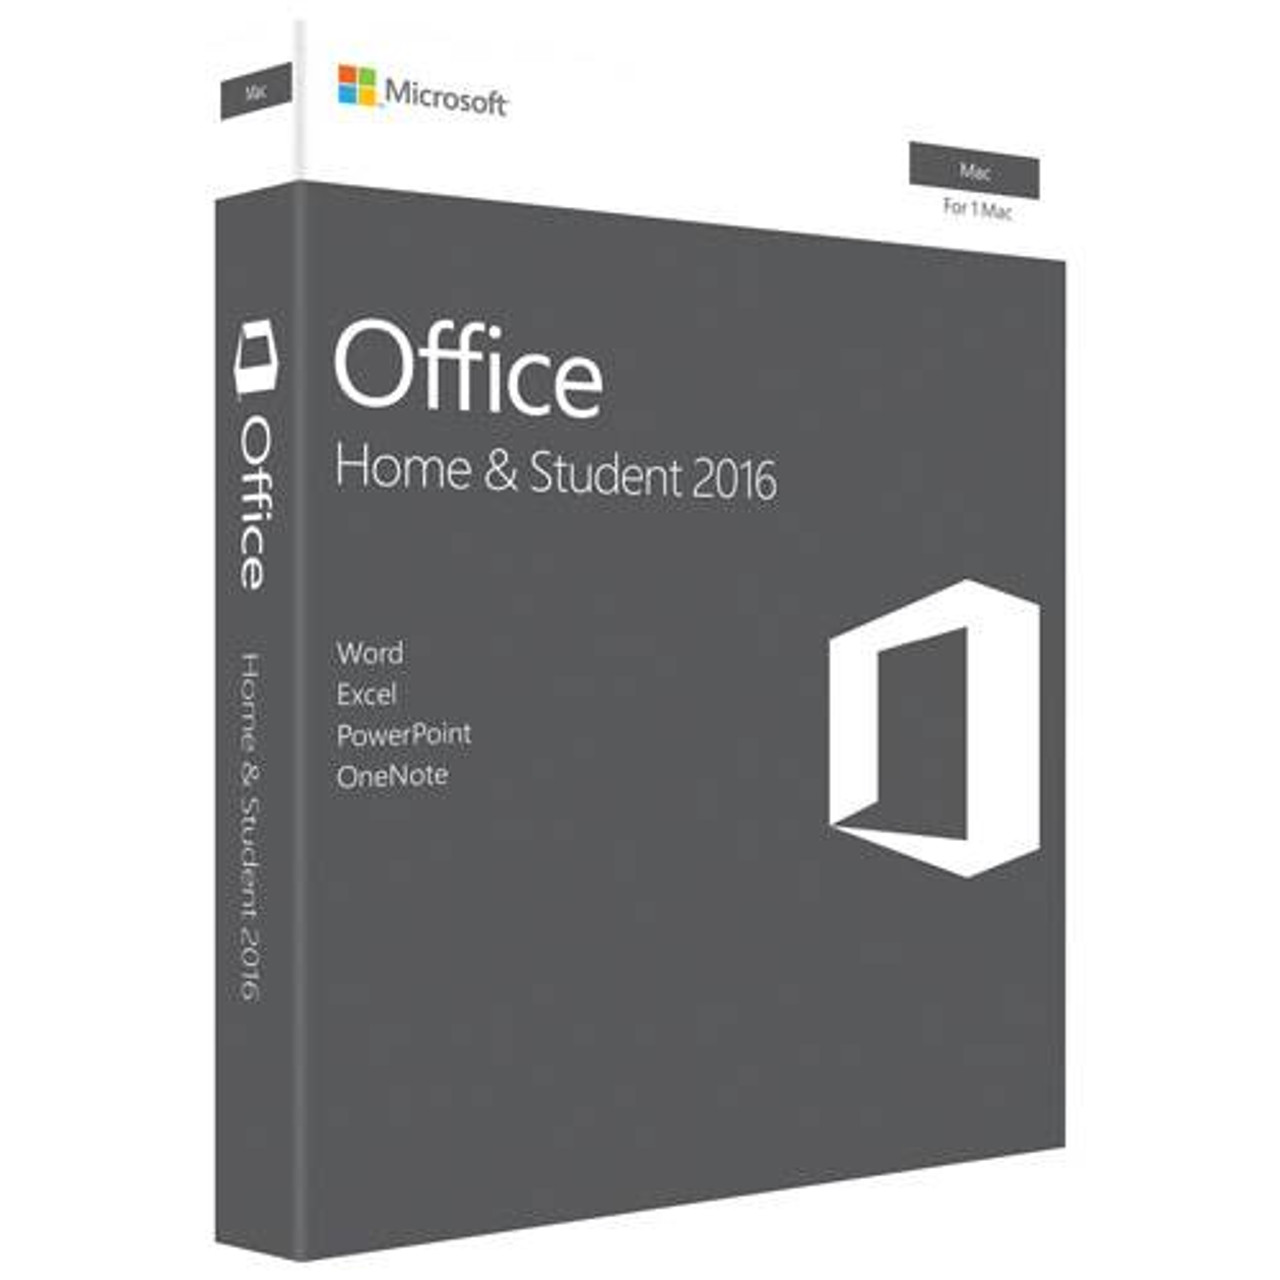 Microsoft Office Home and Student 2016 for Mac - 1 MAC - Retail - GZA-00984  | AusPCMarket